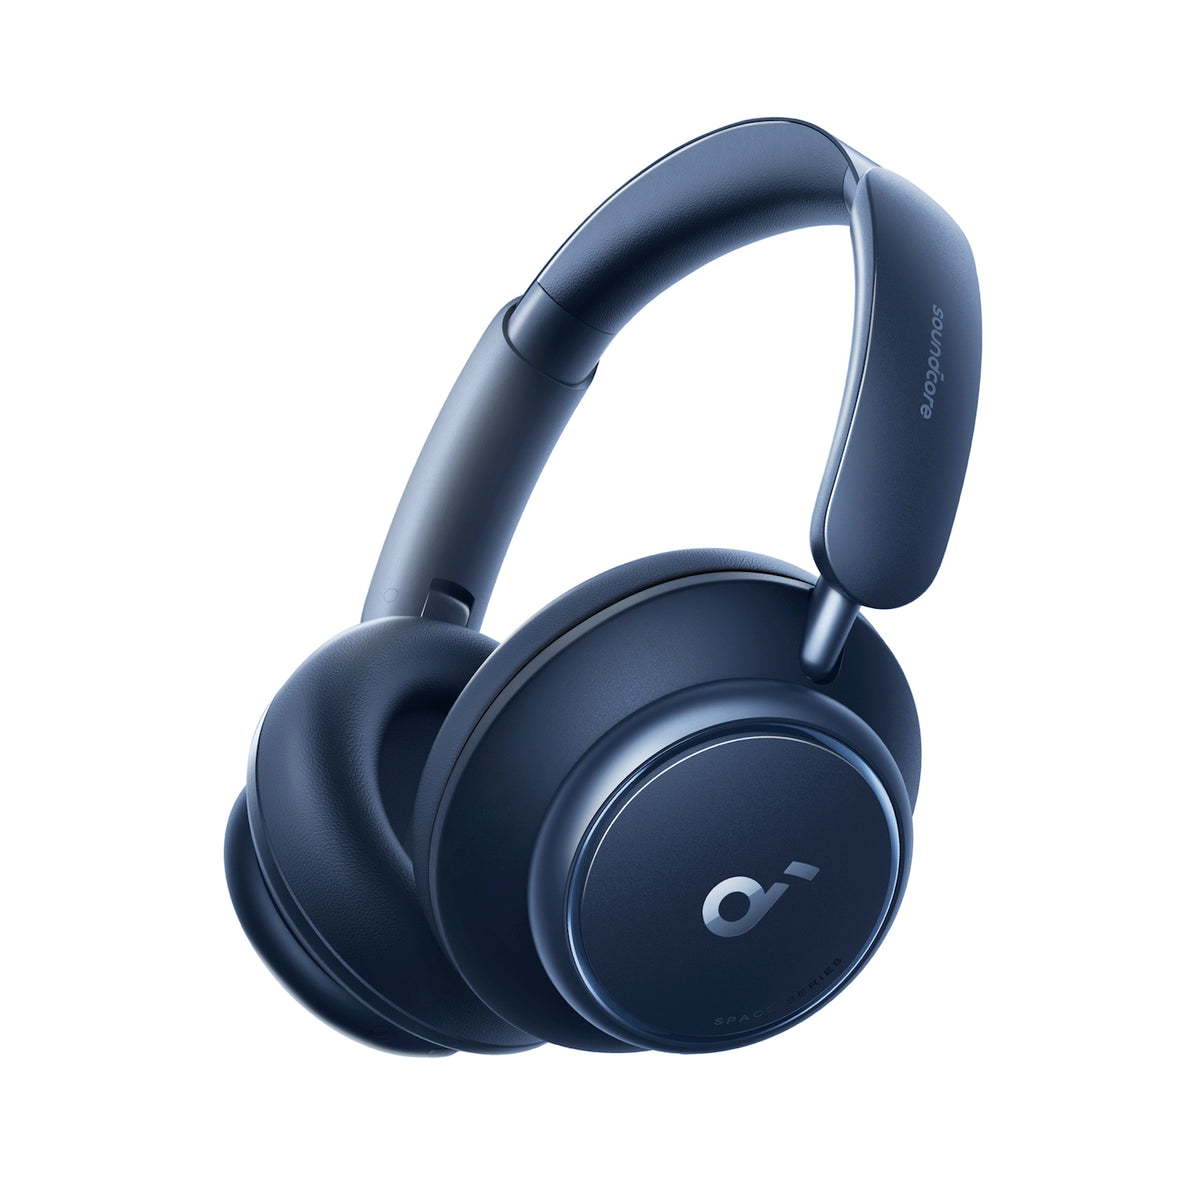 Buy Space Q45 All-New Noise Cancelling Headphones - soundcore US 